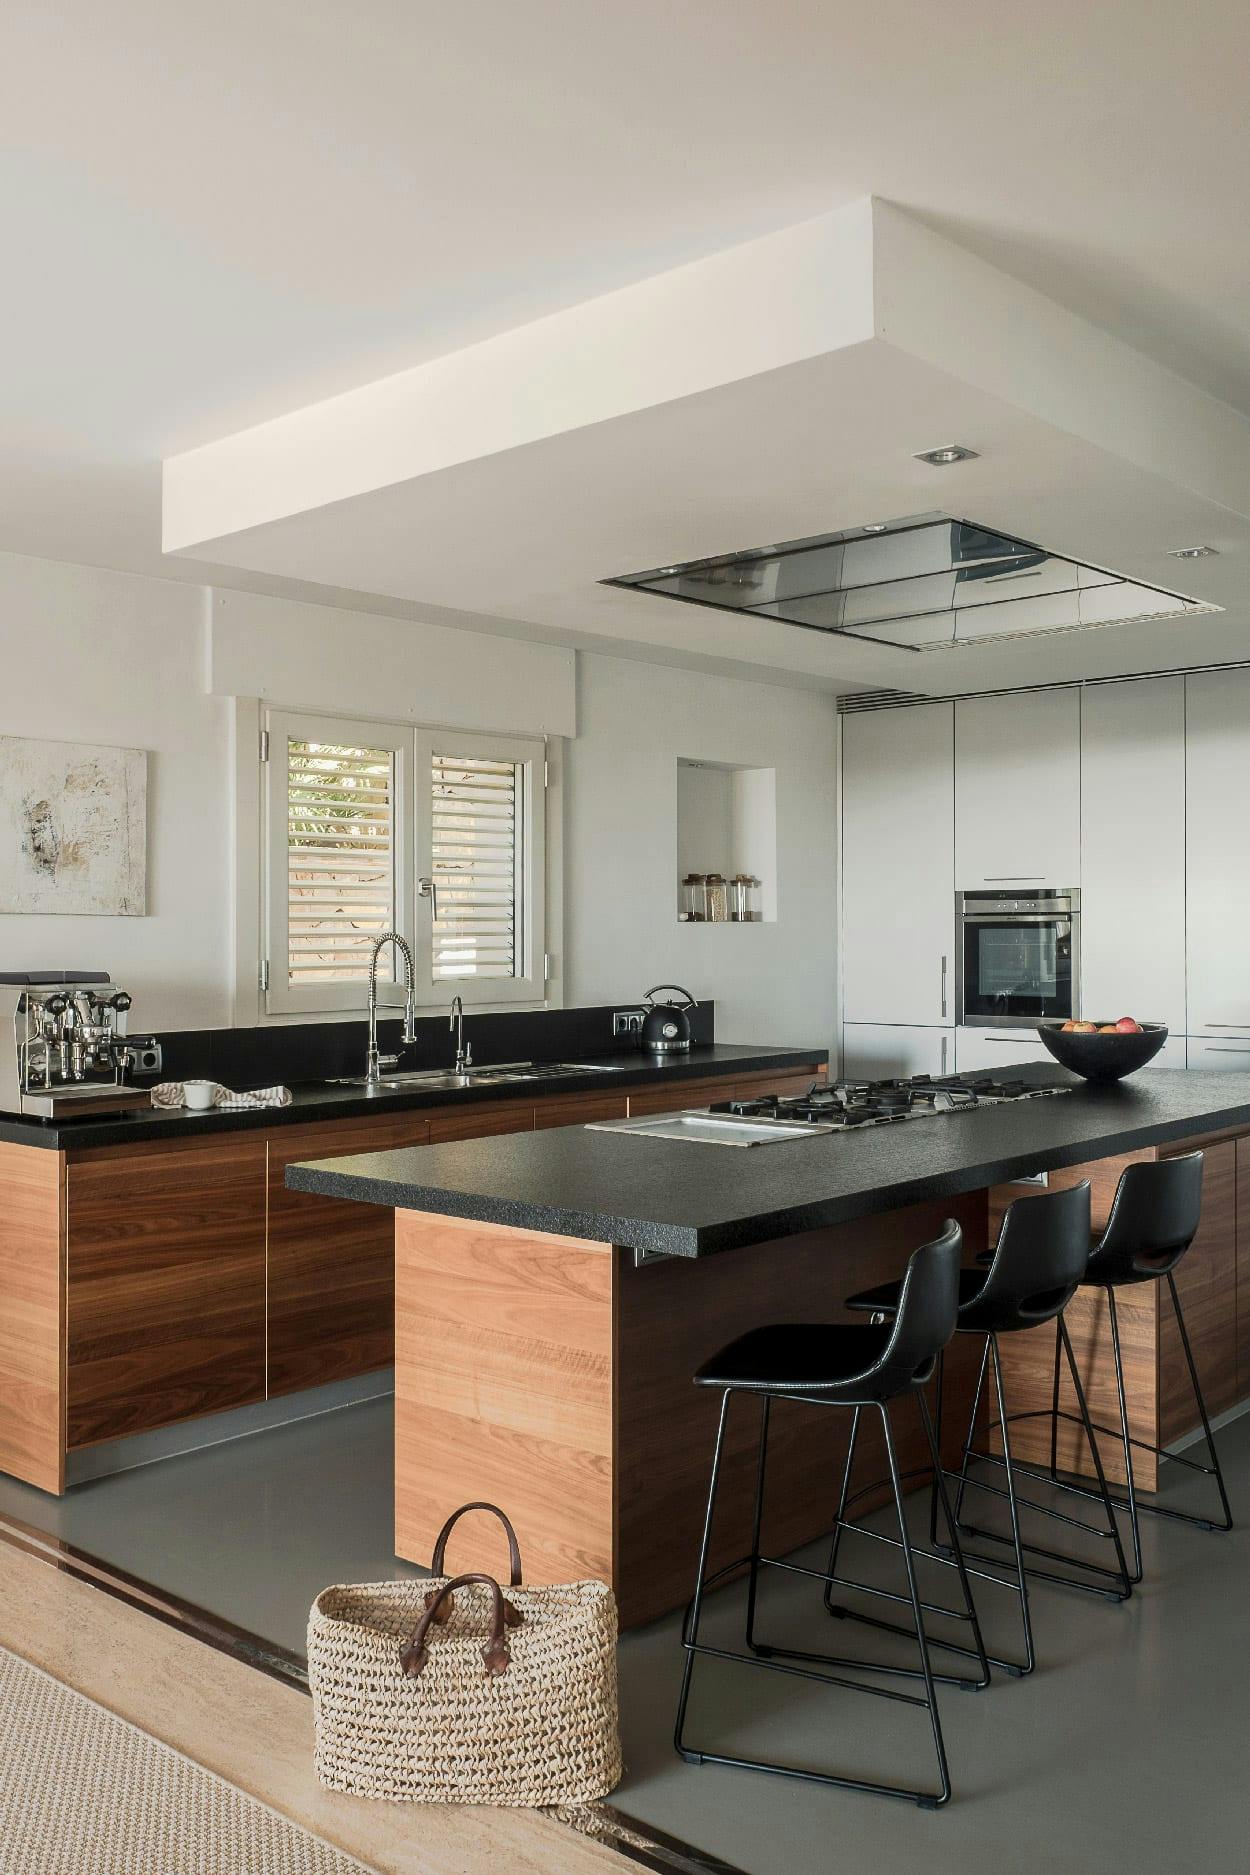 The image showcases a modern, spacious kitchen with a black countertop and a black island. The kitchen is equipped with various appliances, including a refrigerator, oven, and microwave. There are two sinks, one on the left side of the kitchen and another on the right side. A dining table is located in the middle of the kitchen, surrounded by chairs.

In addition to the kitchen appliances, there are two chairs placed near the dining table, and a handbag can be seen on the left side of the room. The kitchen also features